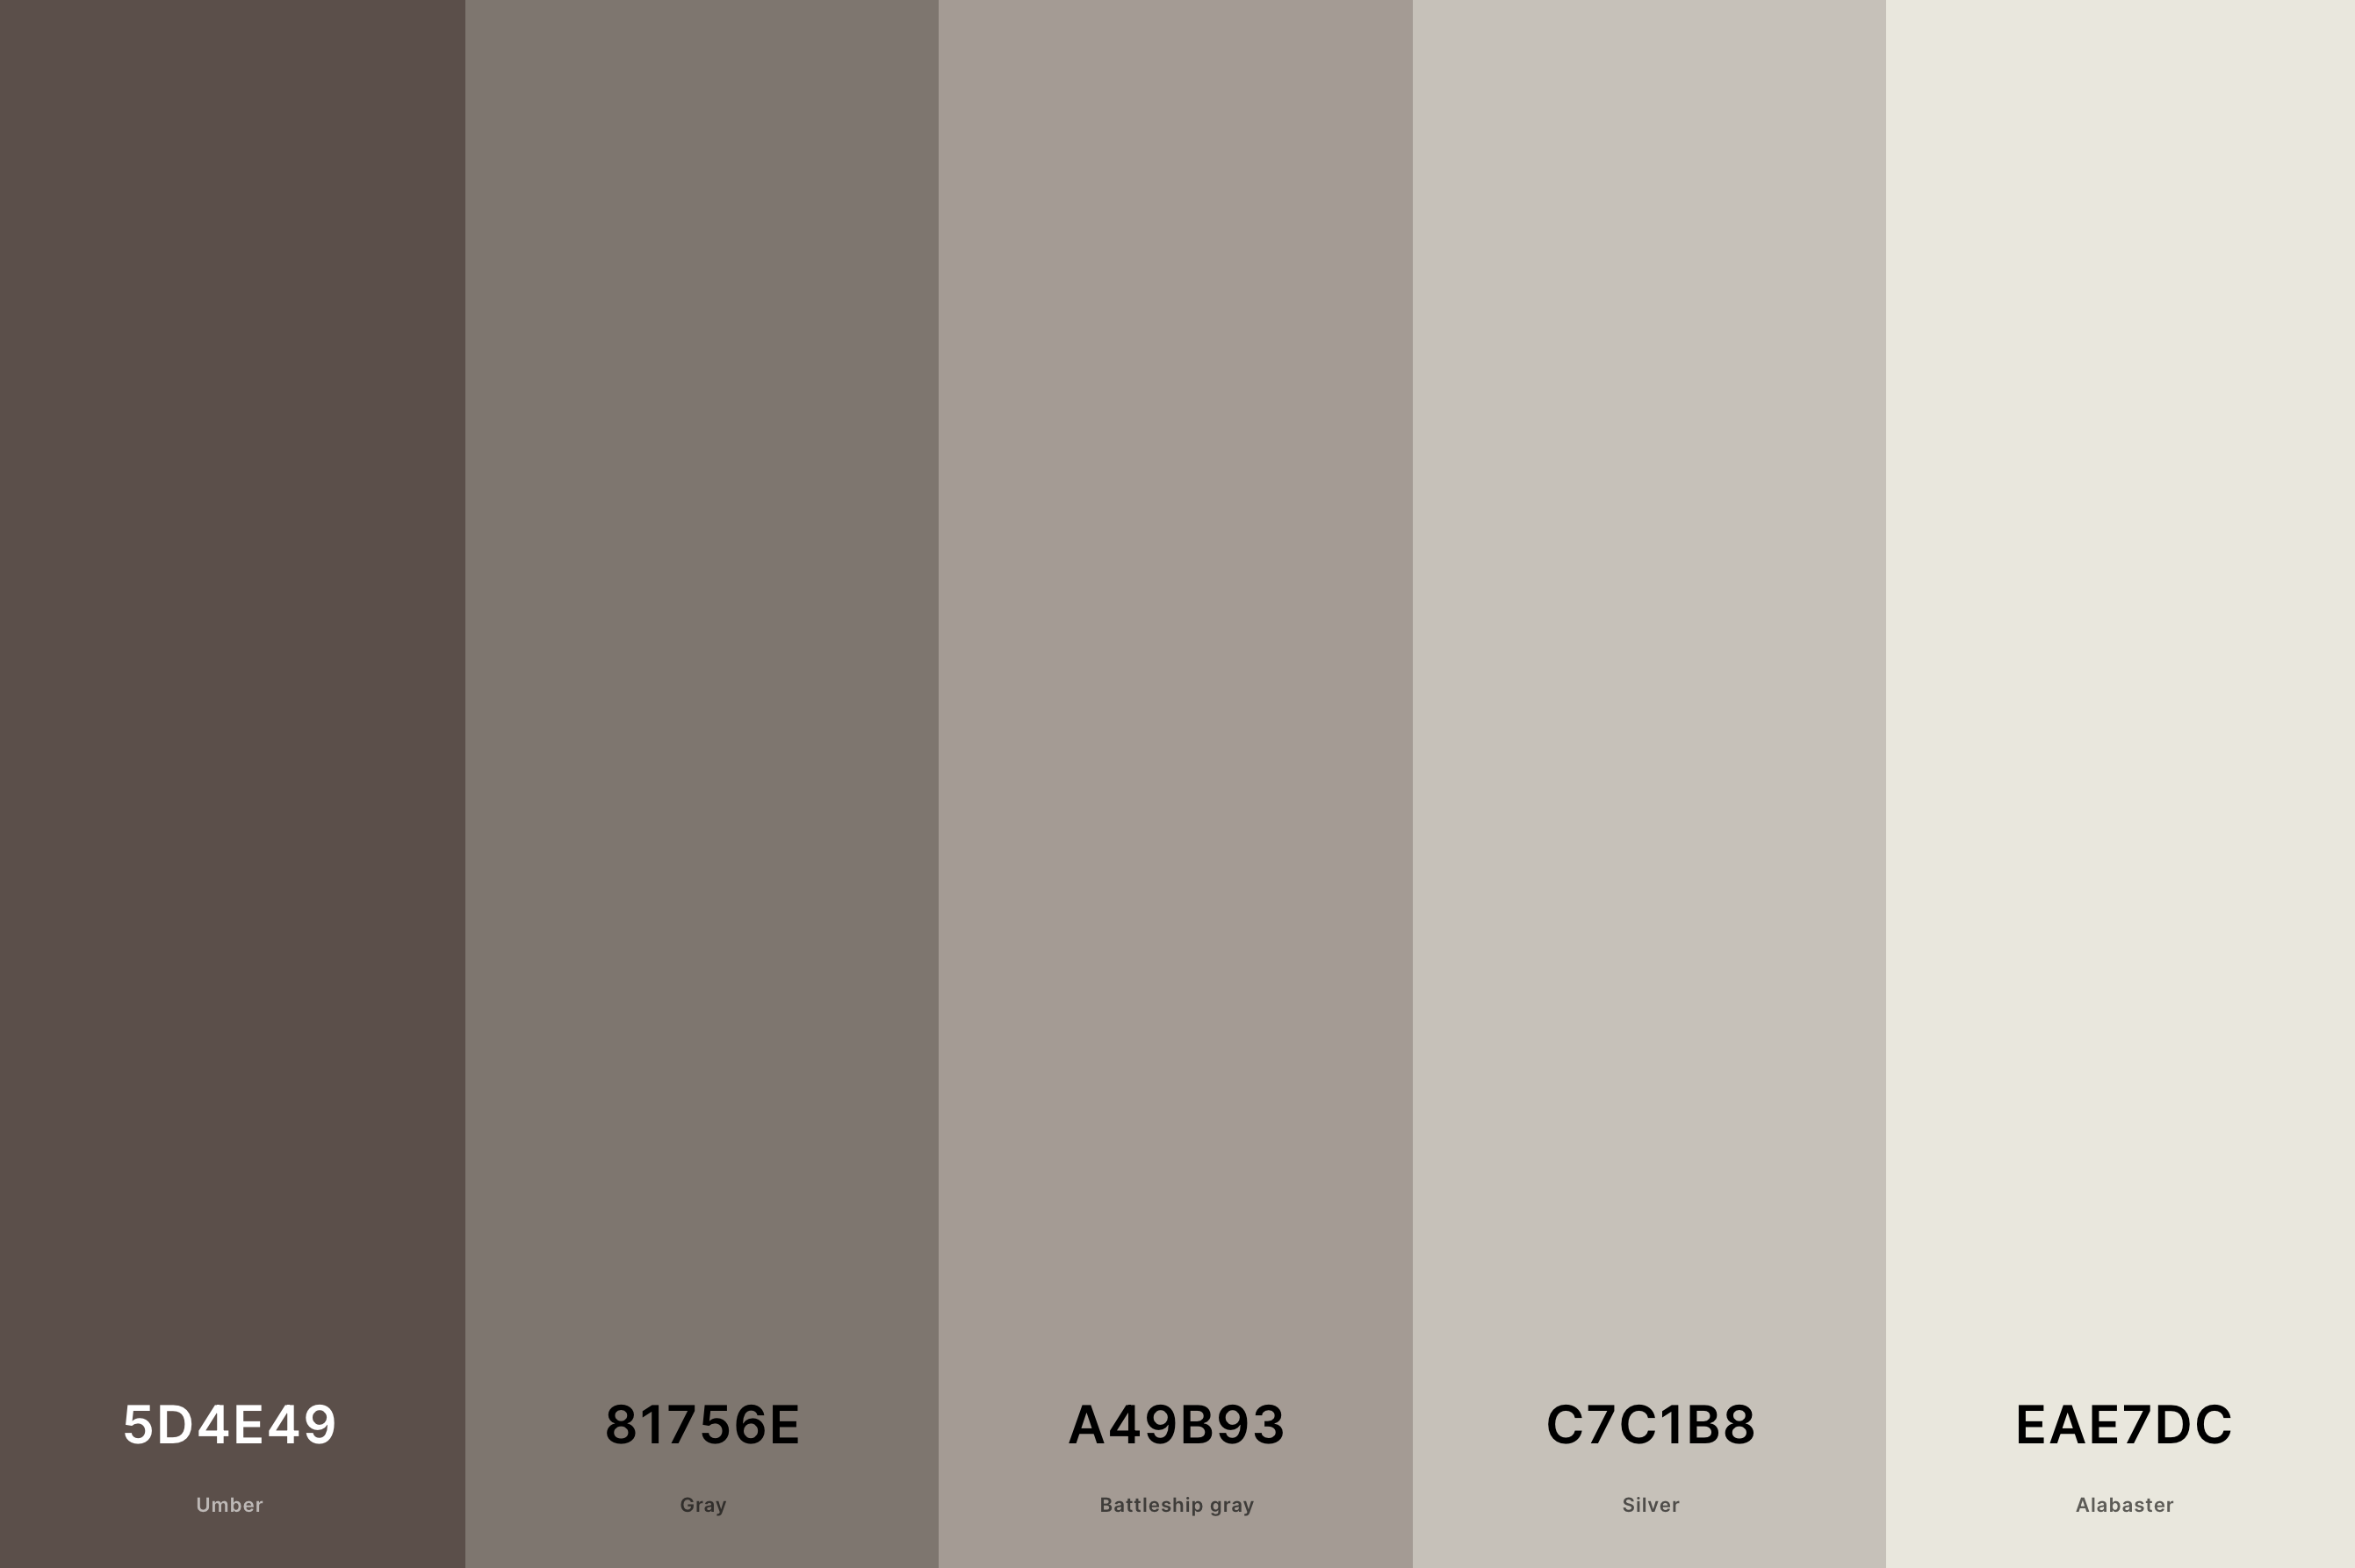 12. Warm Gray Color Palette Color Palette with Umber (Hex #5D4E49) + Gray (Hex #81756E) + Battleship Gray (Hex #A49B93) + Silver (Hex #C7C1B8) + Alabaster (Hex #EAE7DC) Color Palette with Hex Codes